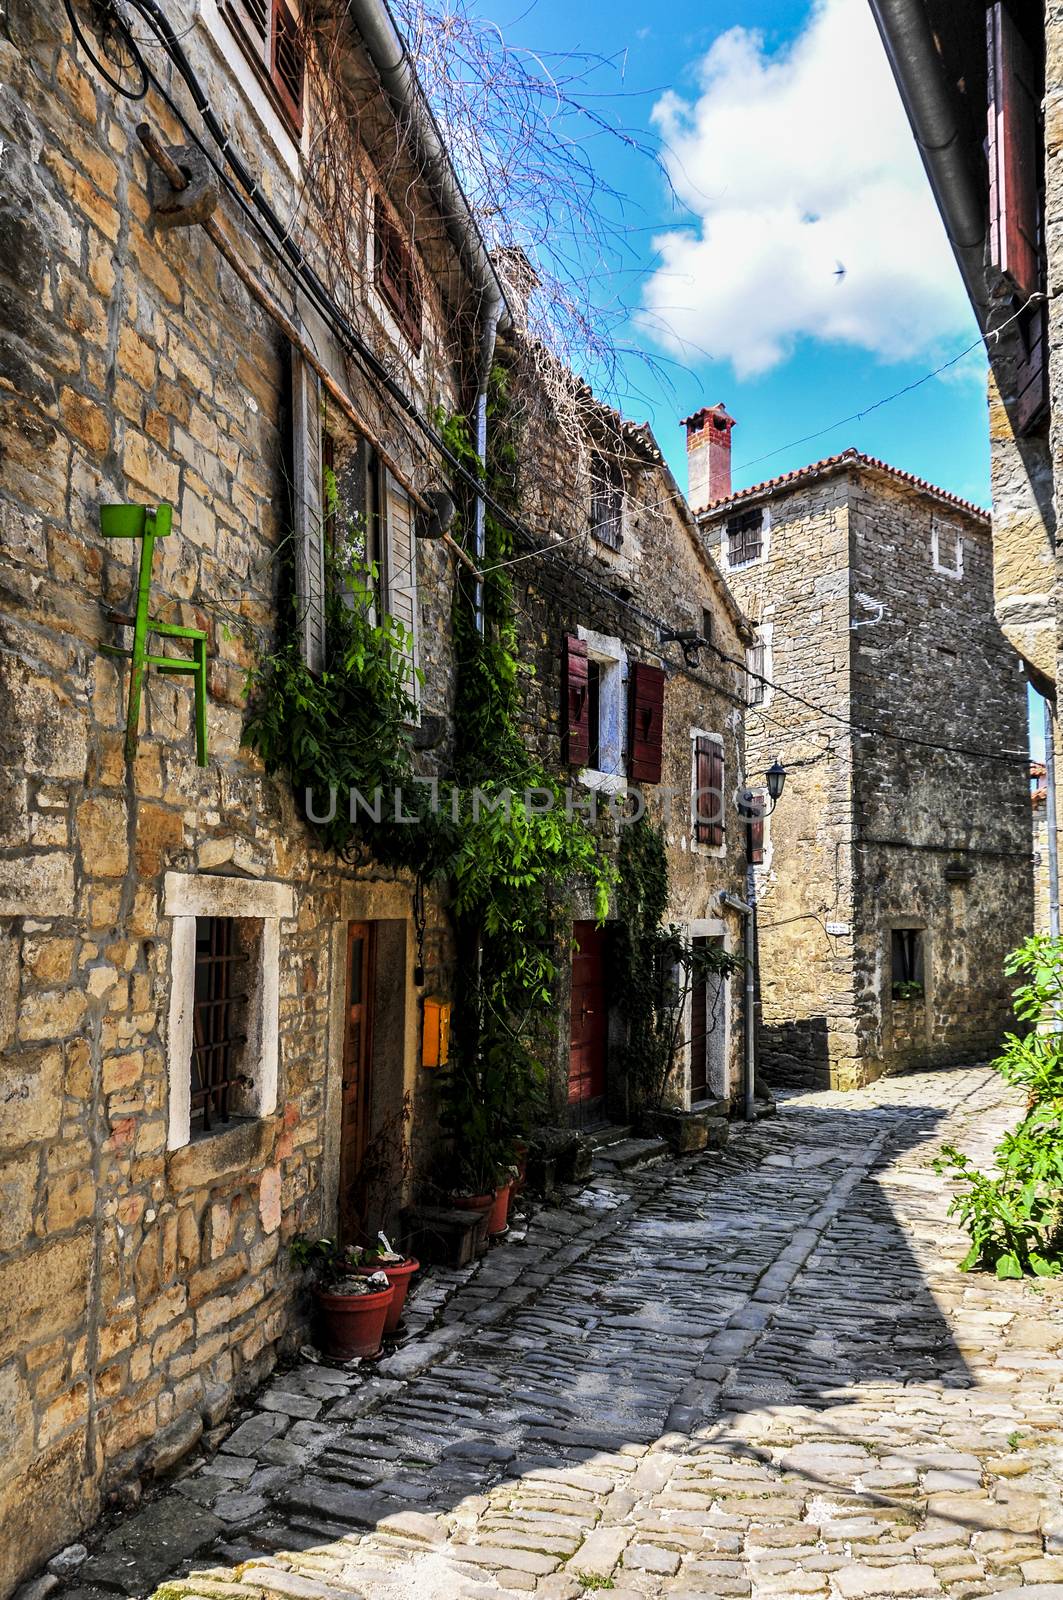 Old medieval town with stone paved roads by asafaric